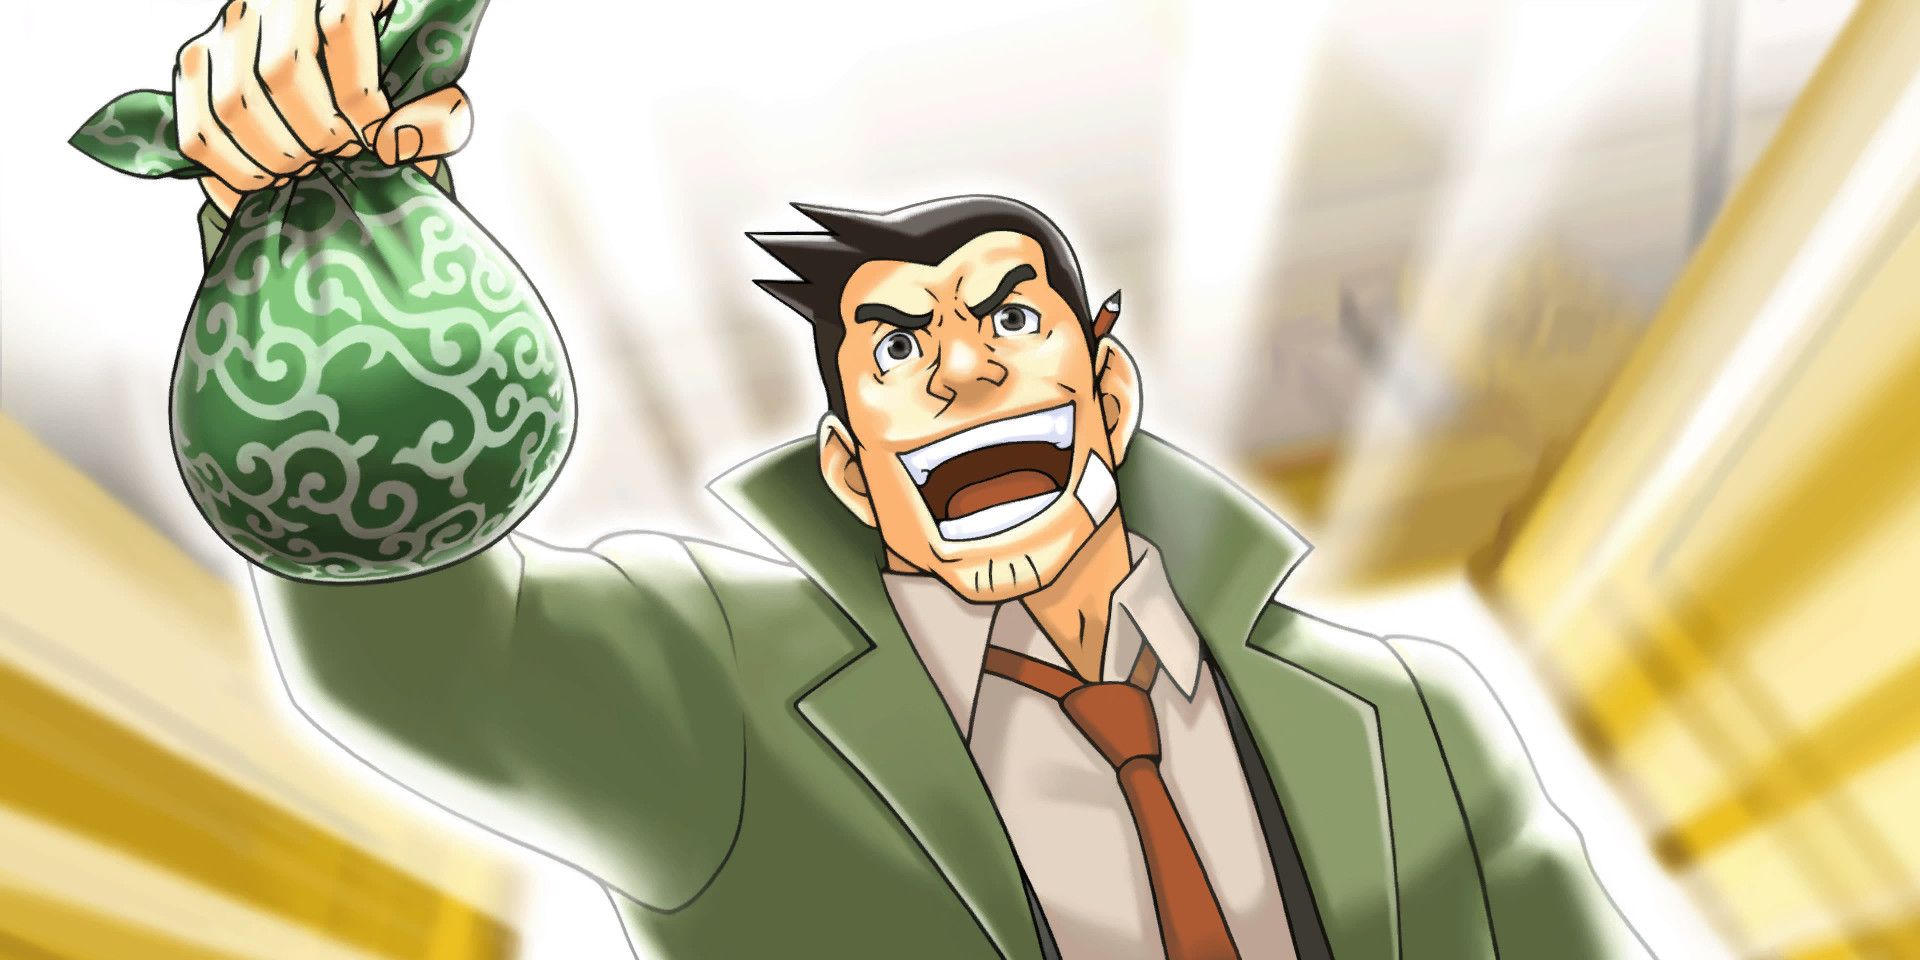 Dick Gumshoe holding up a bag of evidence in Ace Attorney.